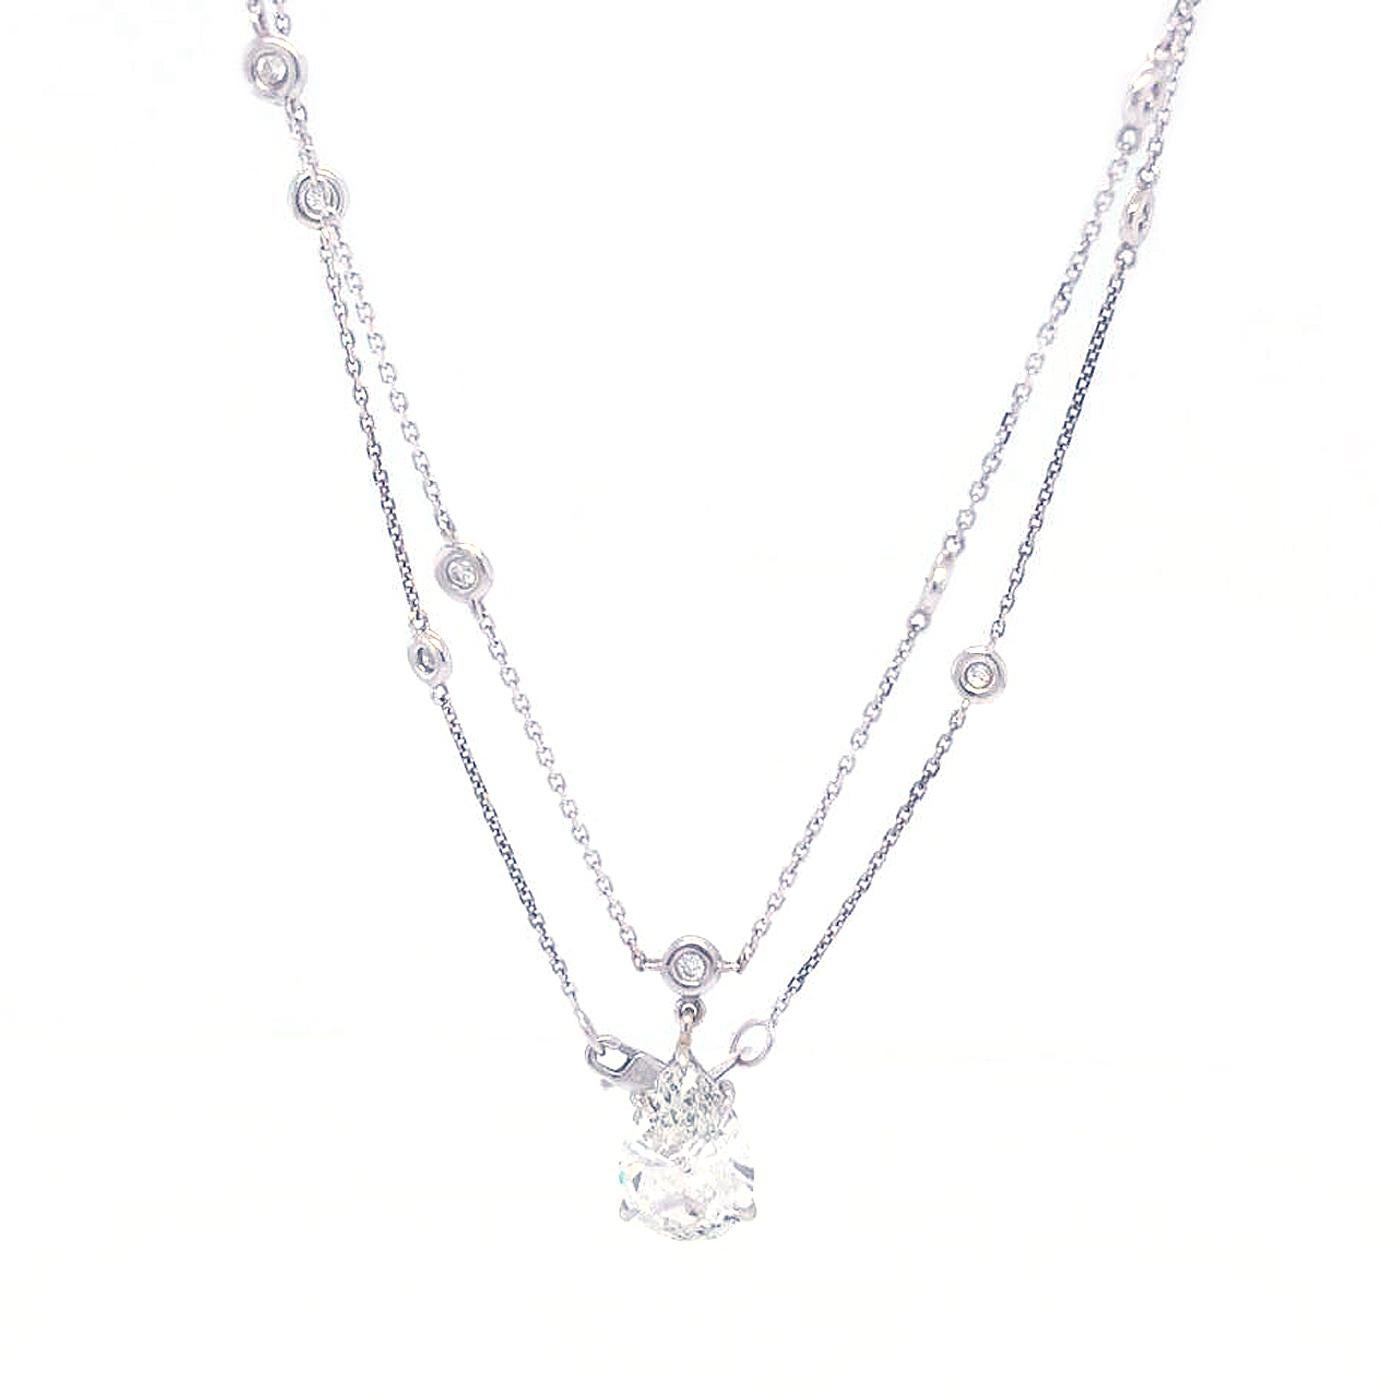 This gorgeous 14k White Gold Pear Shape Diamond by the Yard Pendant Necklace is feminine and brilliant. As with all jewelry, only the absolute best quality diamonds are used to create this incredible creation, this particular necklace is